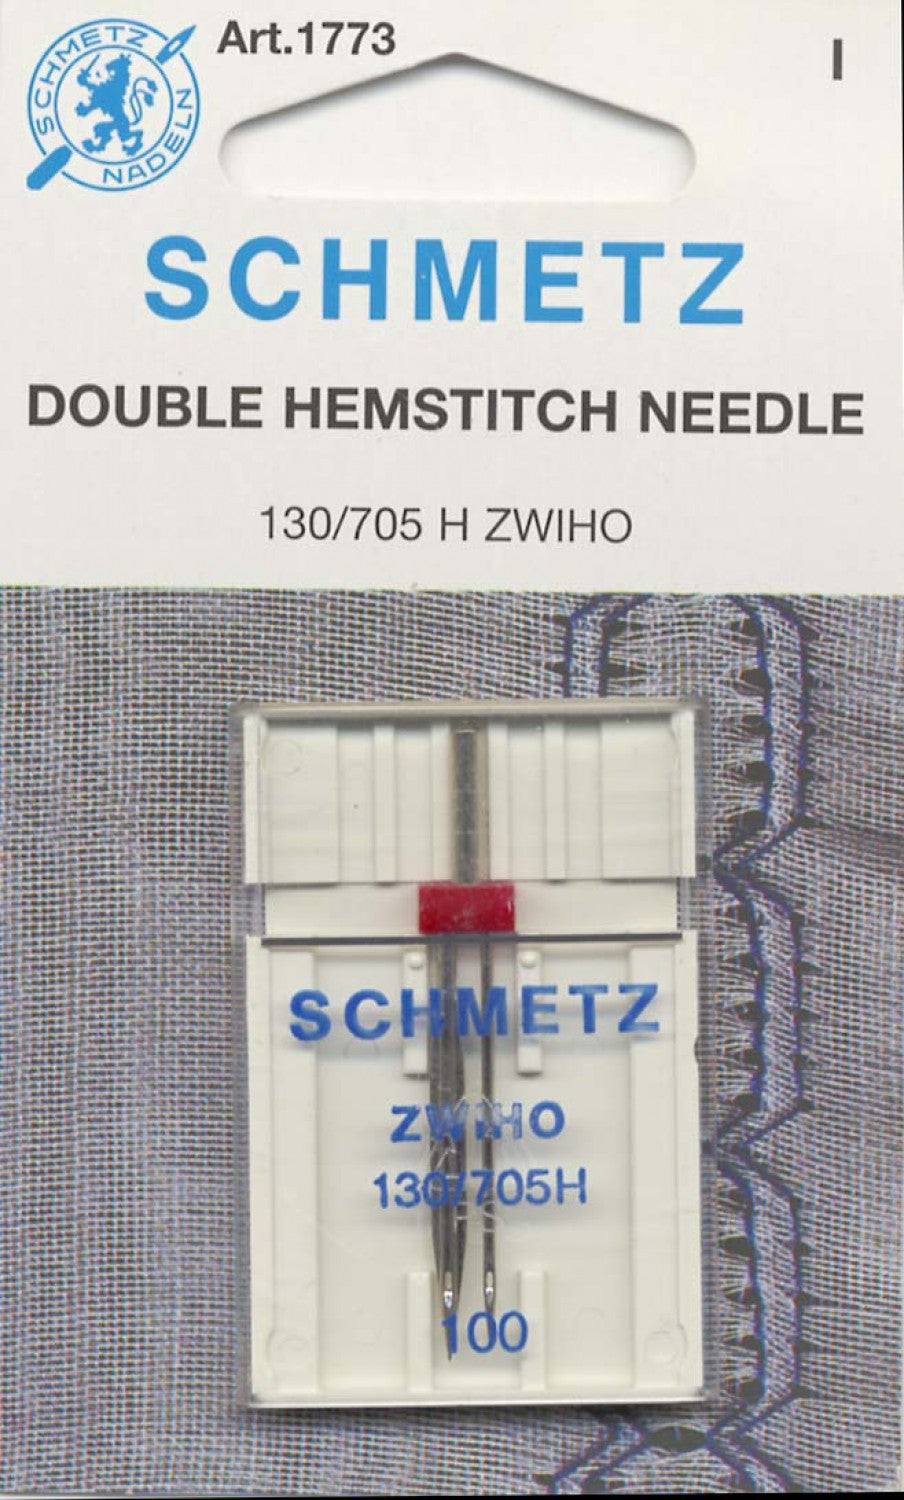 How to Use a Wing Needle for Hemstitching